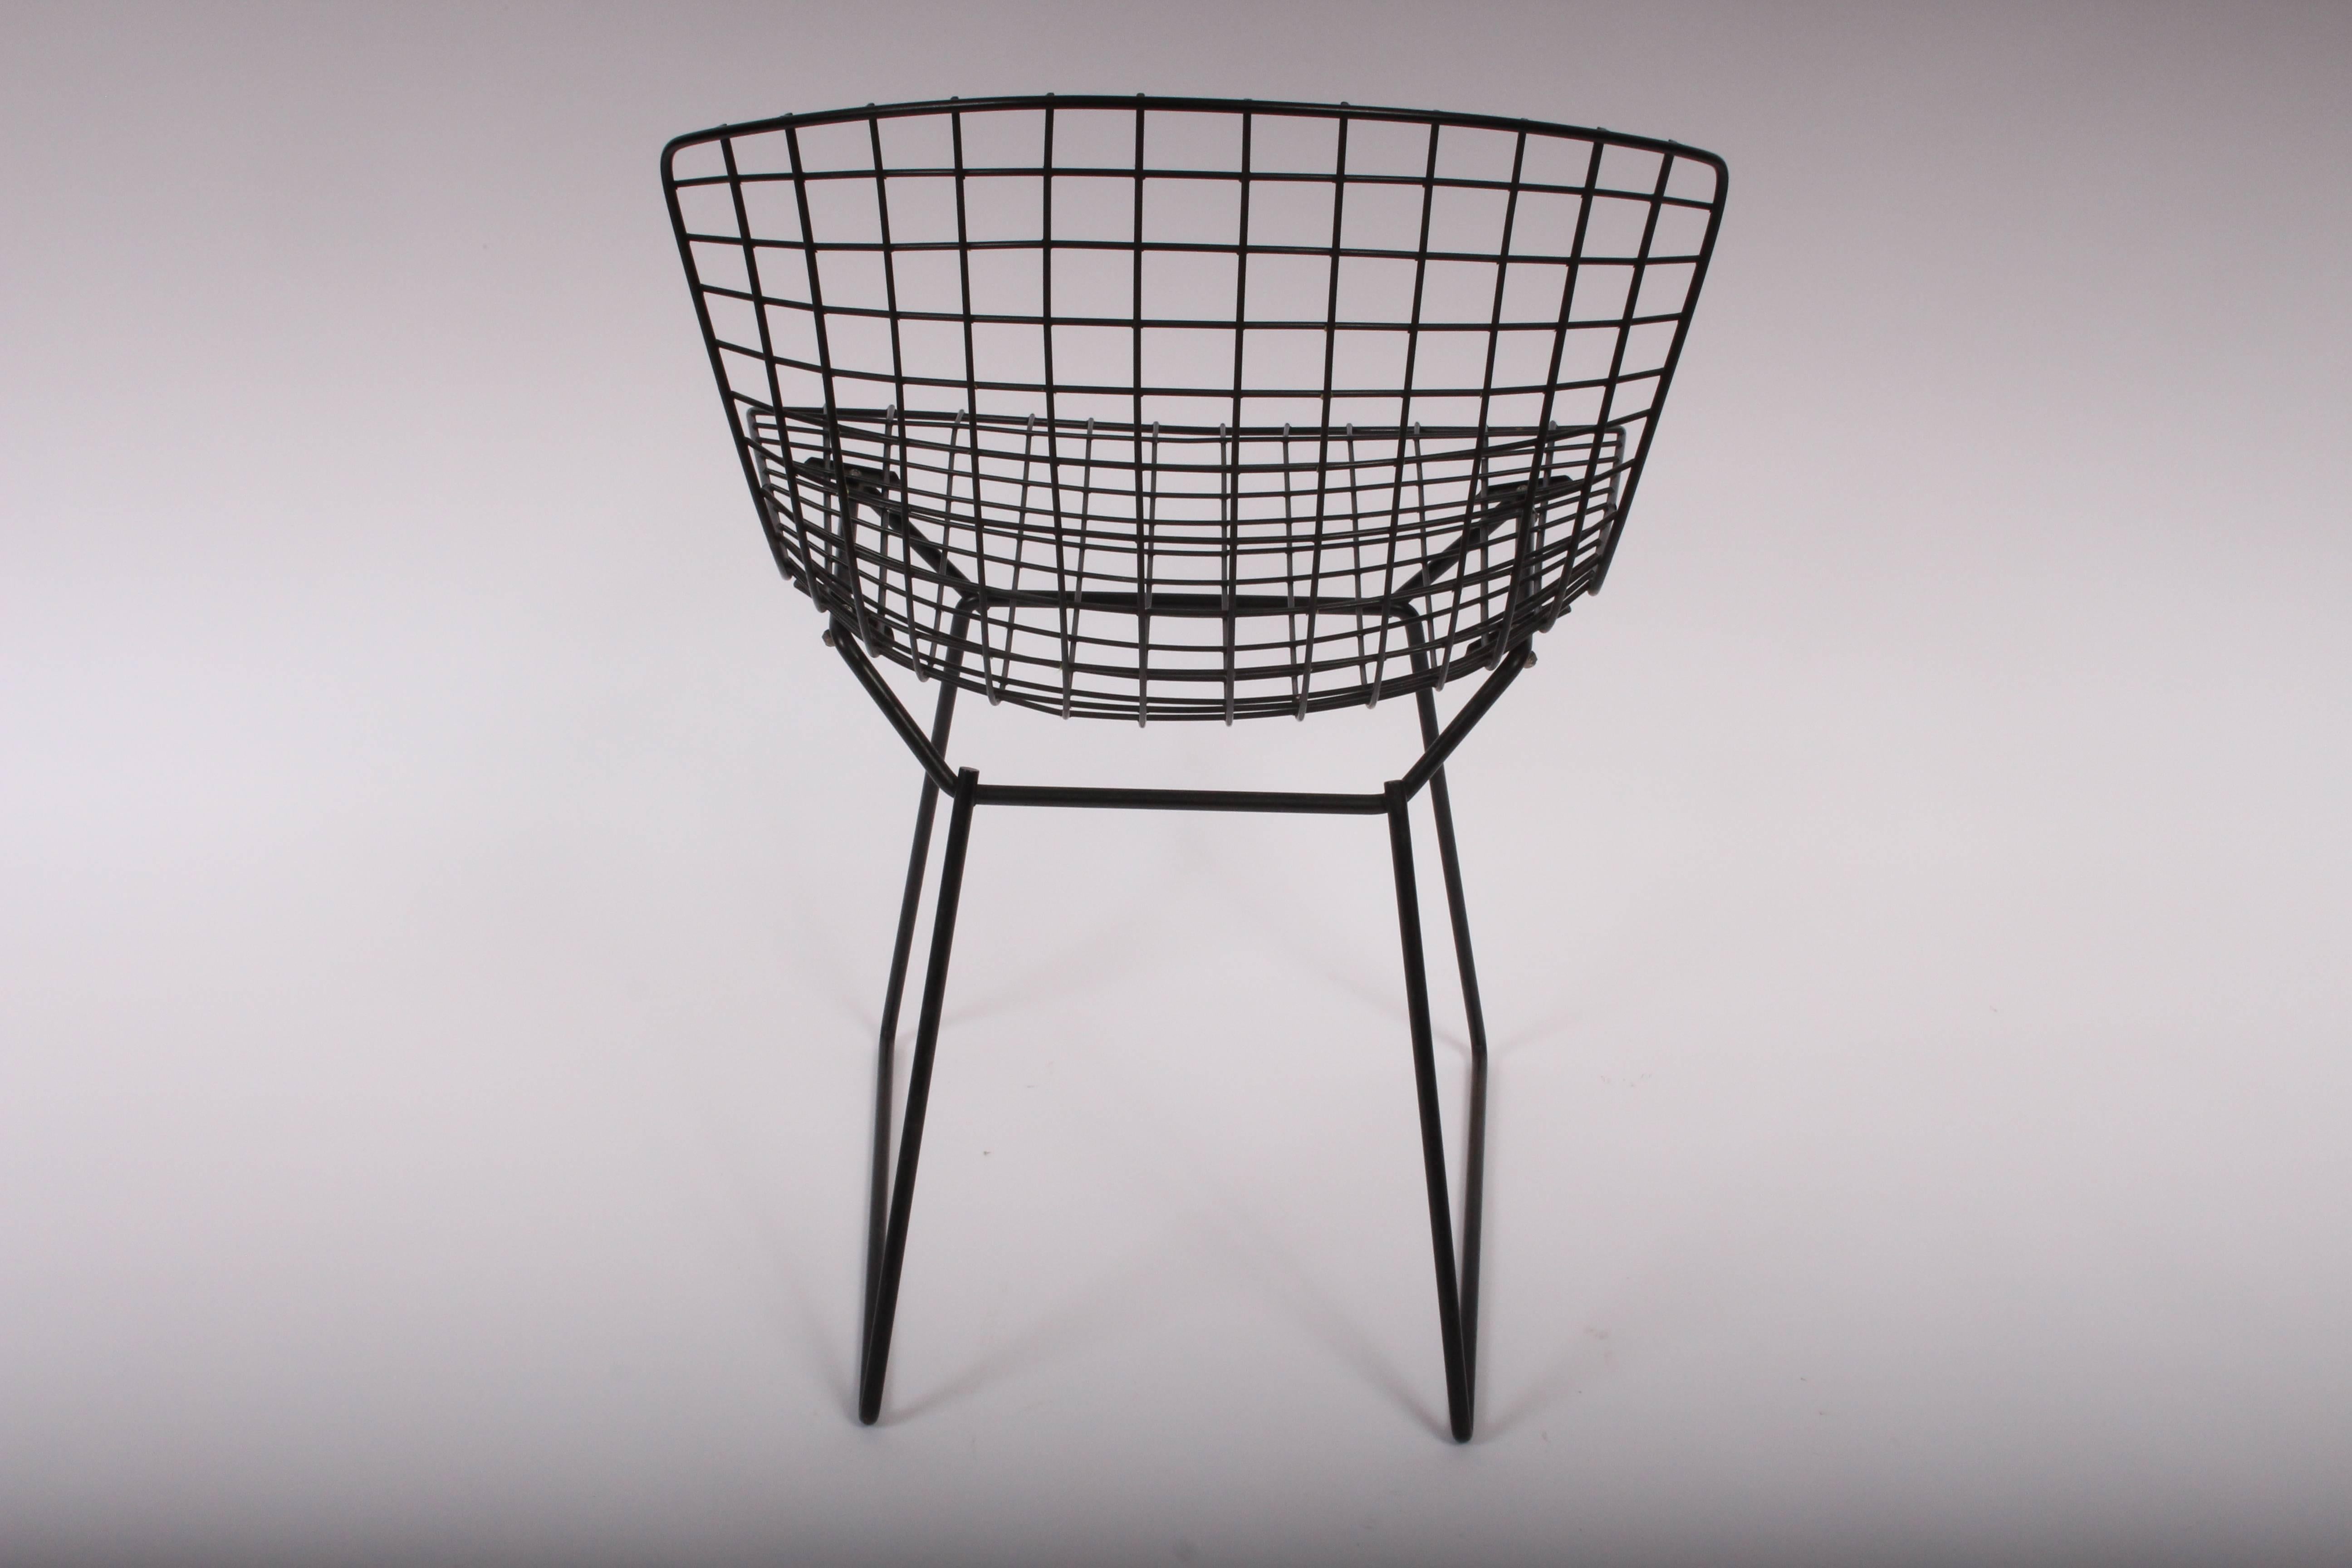 Early set of 4 Harry Bertoia for Knoll indoor outdoor black wire dining chairs with 2 piece chair pads. Featuring enameled black wire frame with original two-piece black vinyl seat and back cushions. Foam needs replacement. Most vinyl covers include